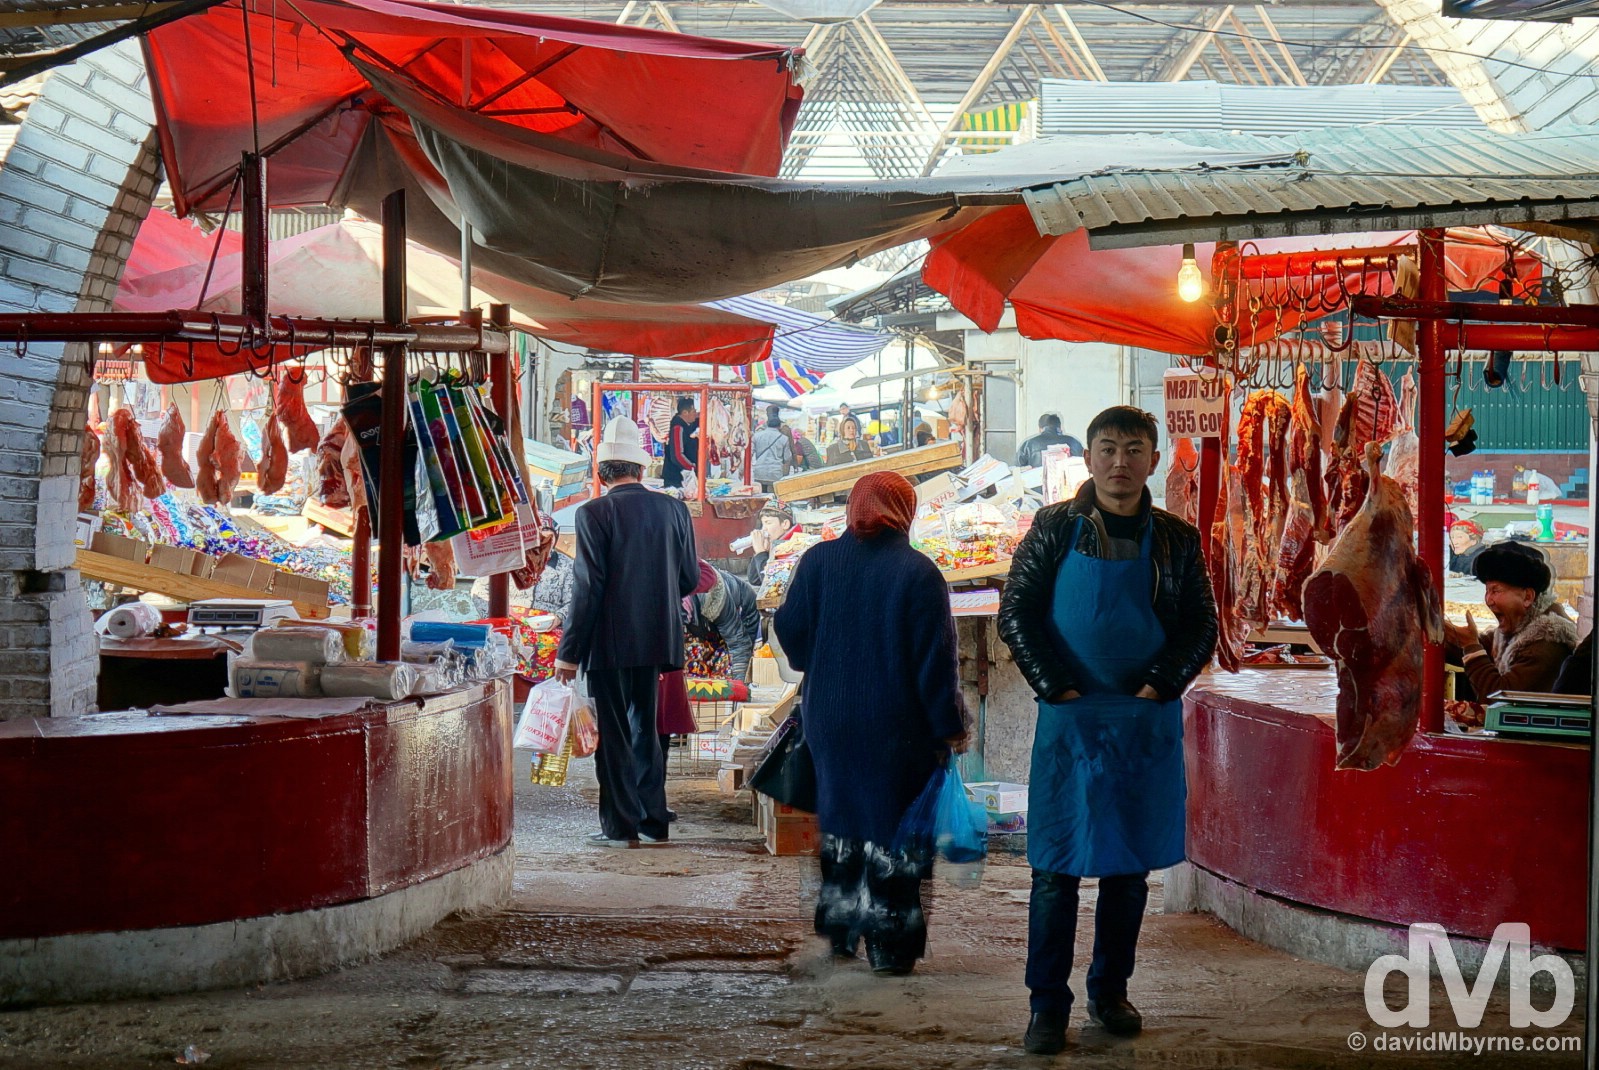 A section of the bazaar in Osh, southern Kyrgyzstan. March 3, 2015.  